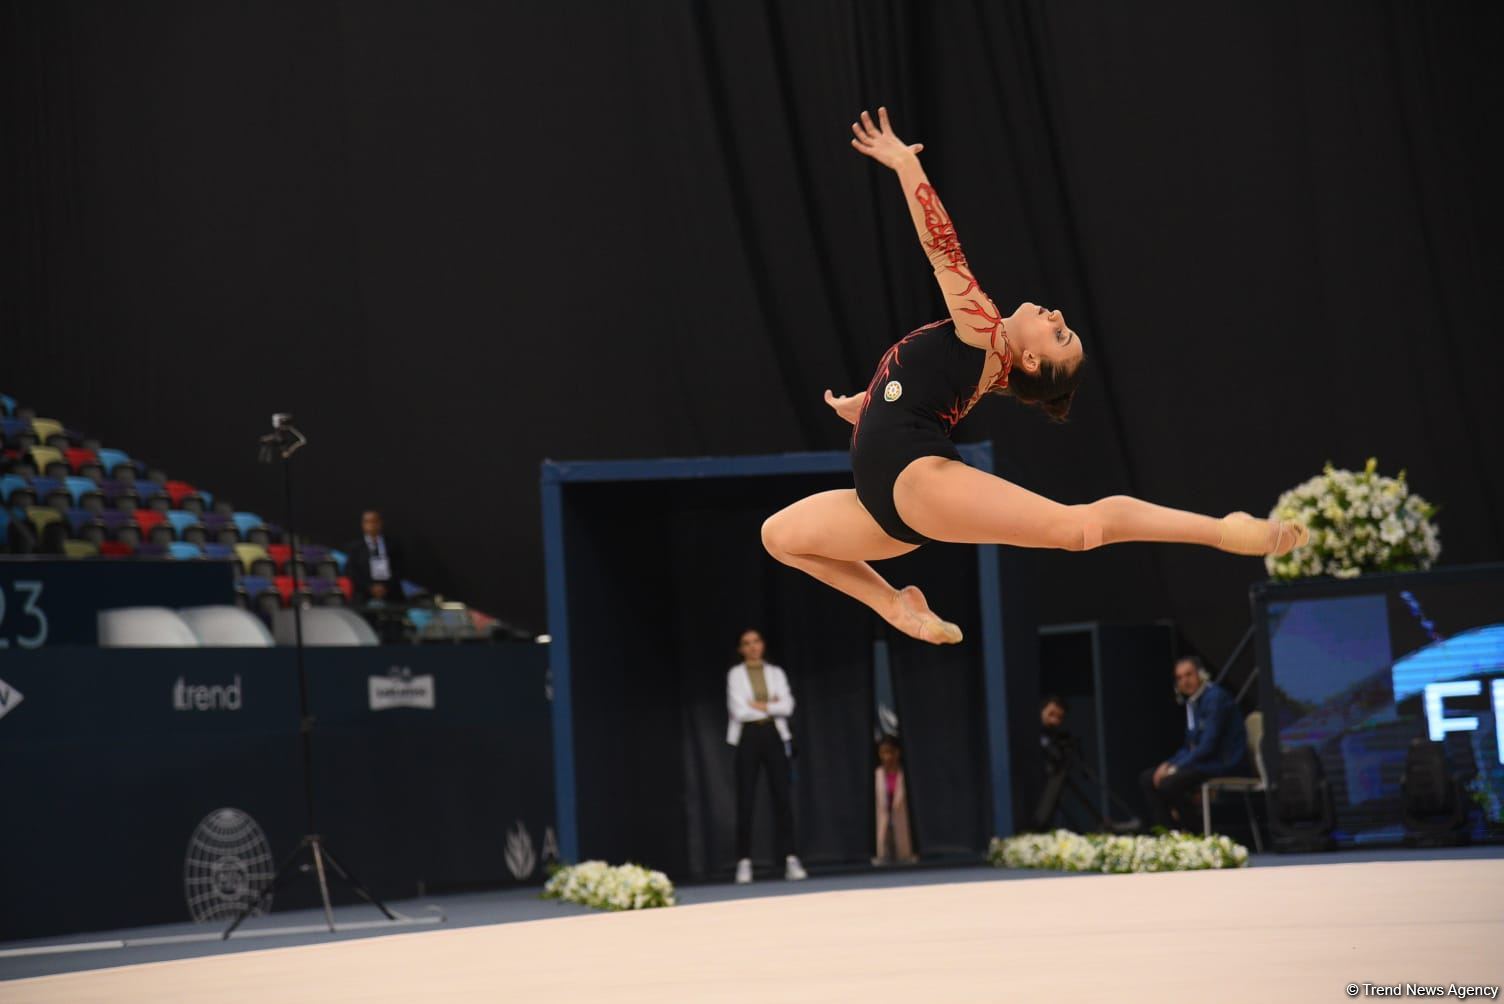 Azerbaijani gymnasts show first results in qualifiers of FIG World Cup in Baku (PHOTO)